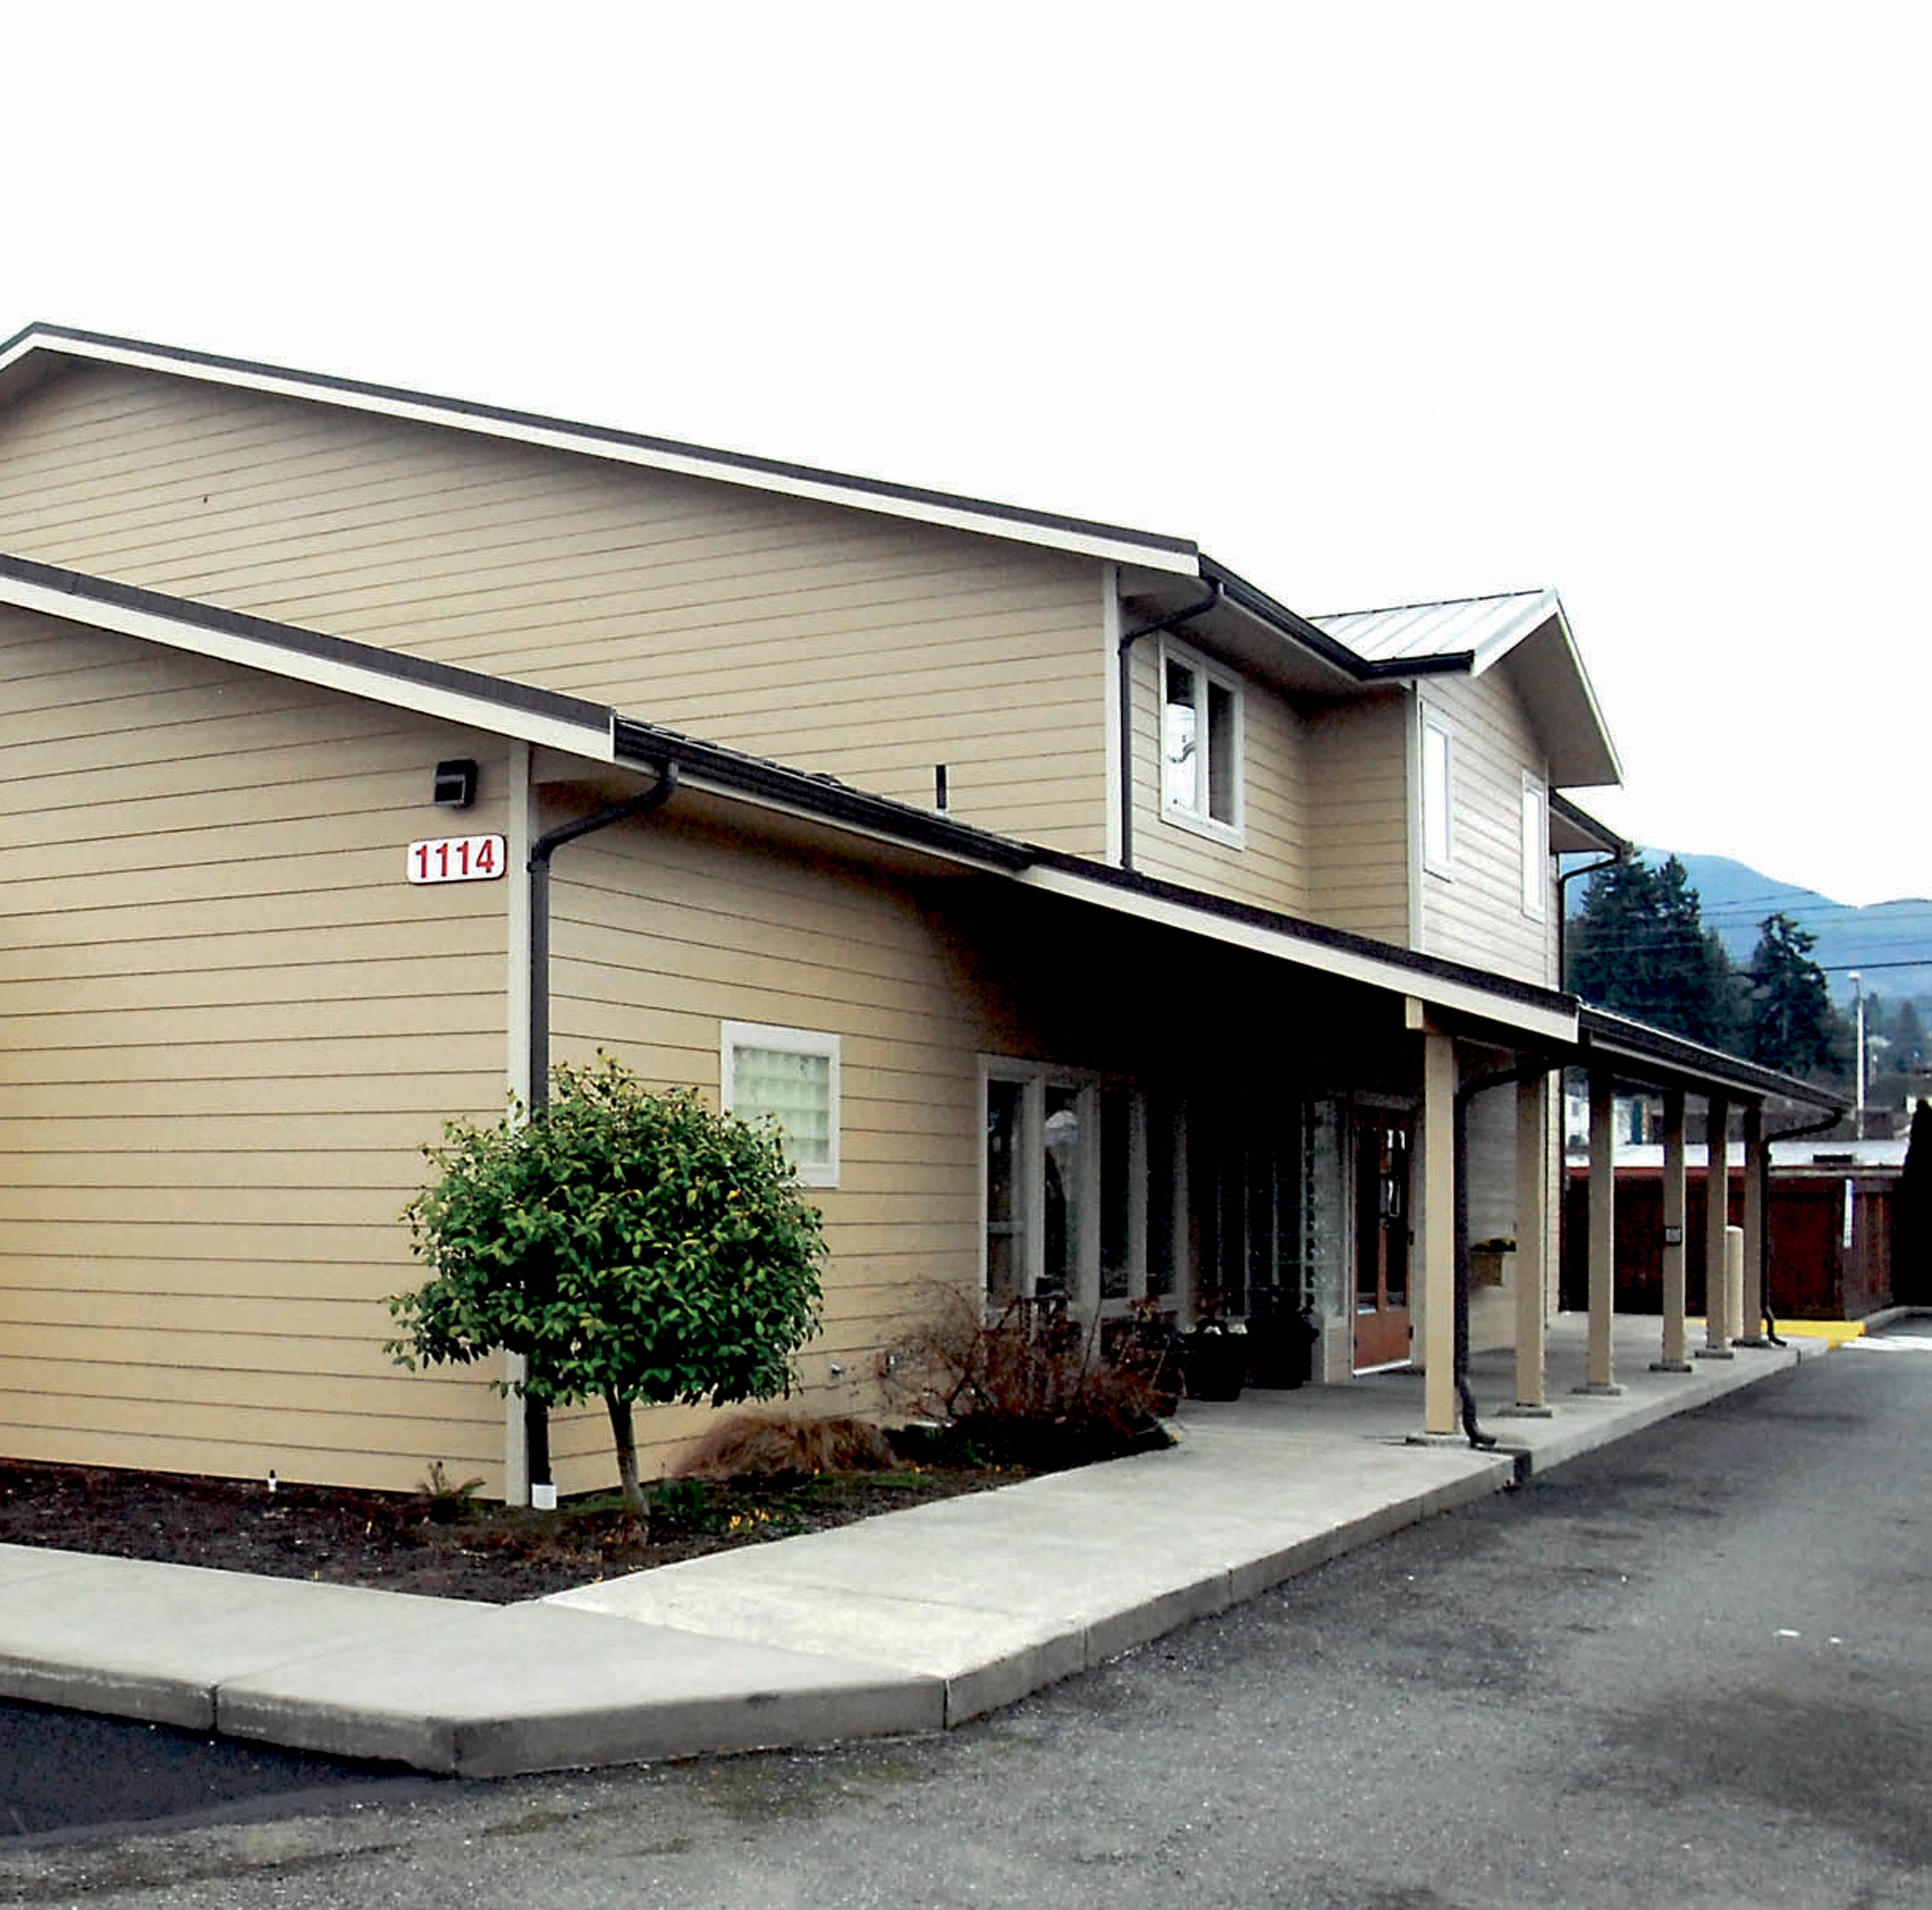 The new North Olympic Peninsula VA Clinic at 1114 Georgiana St. replaces a smaller clinic a block away that opened in 2007.  —Photo by Keith Thorpe/Peninsula Daily News